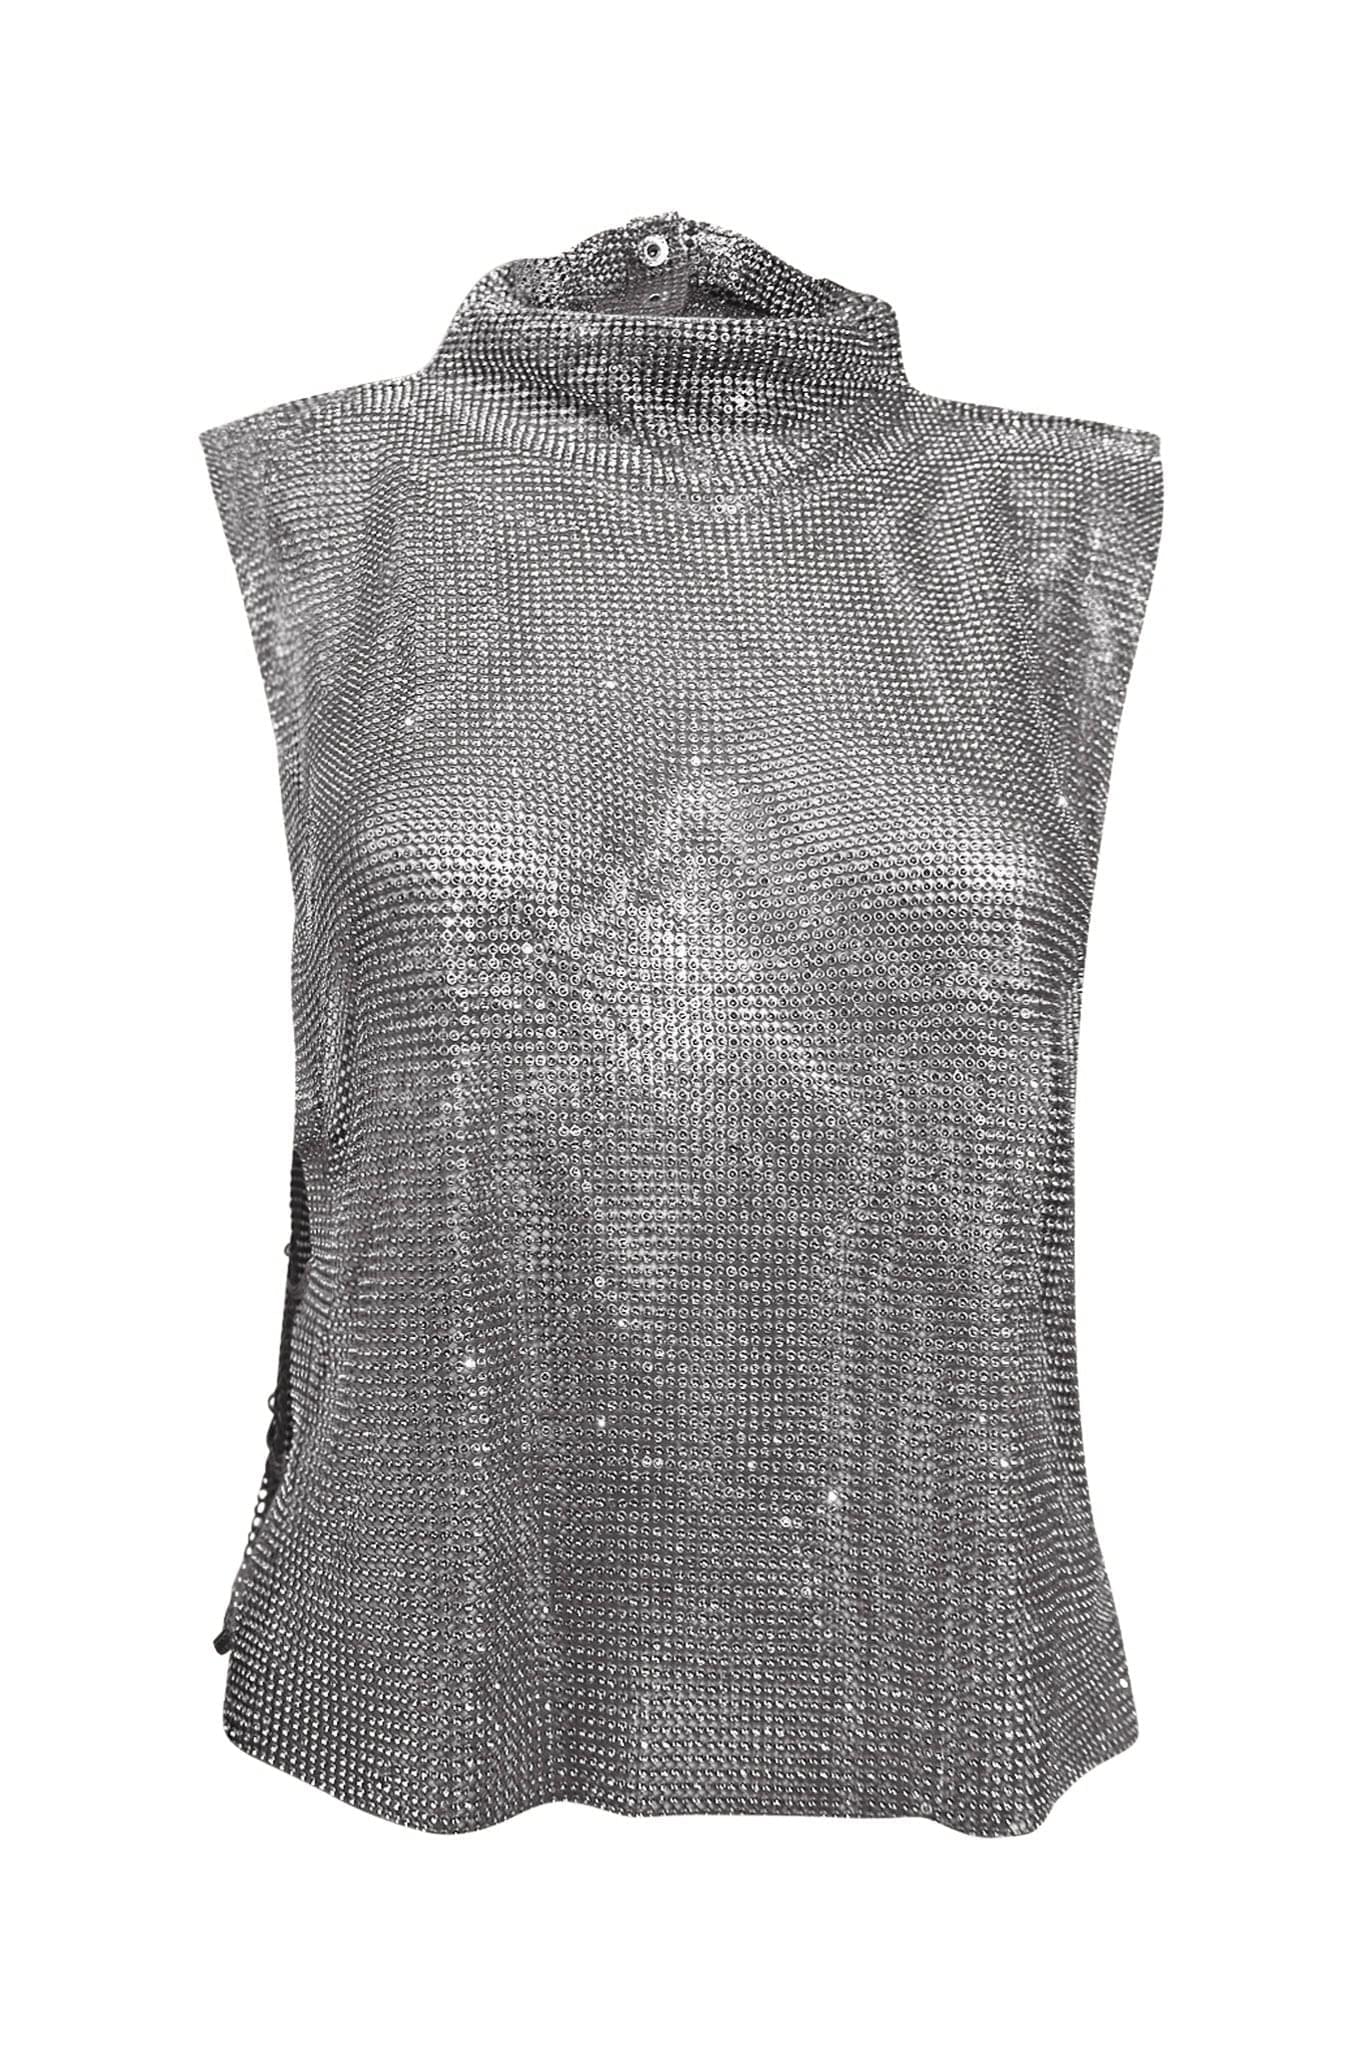 Ares Sequins Top